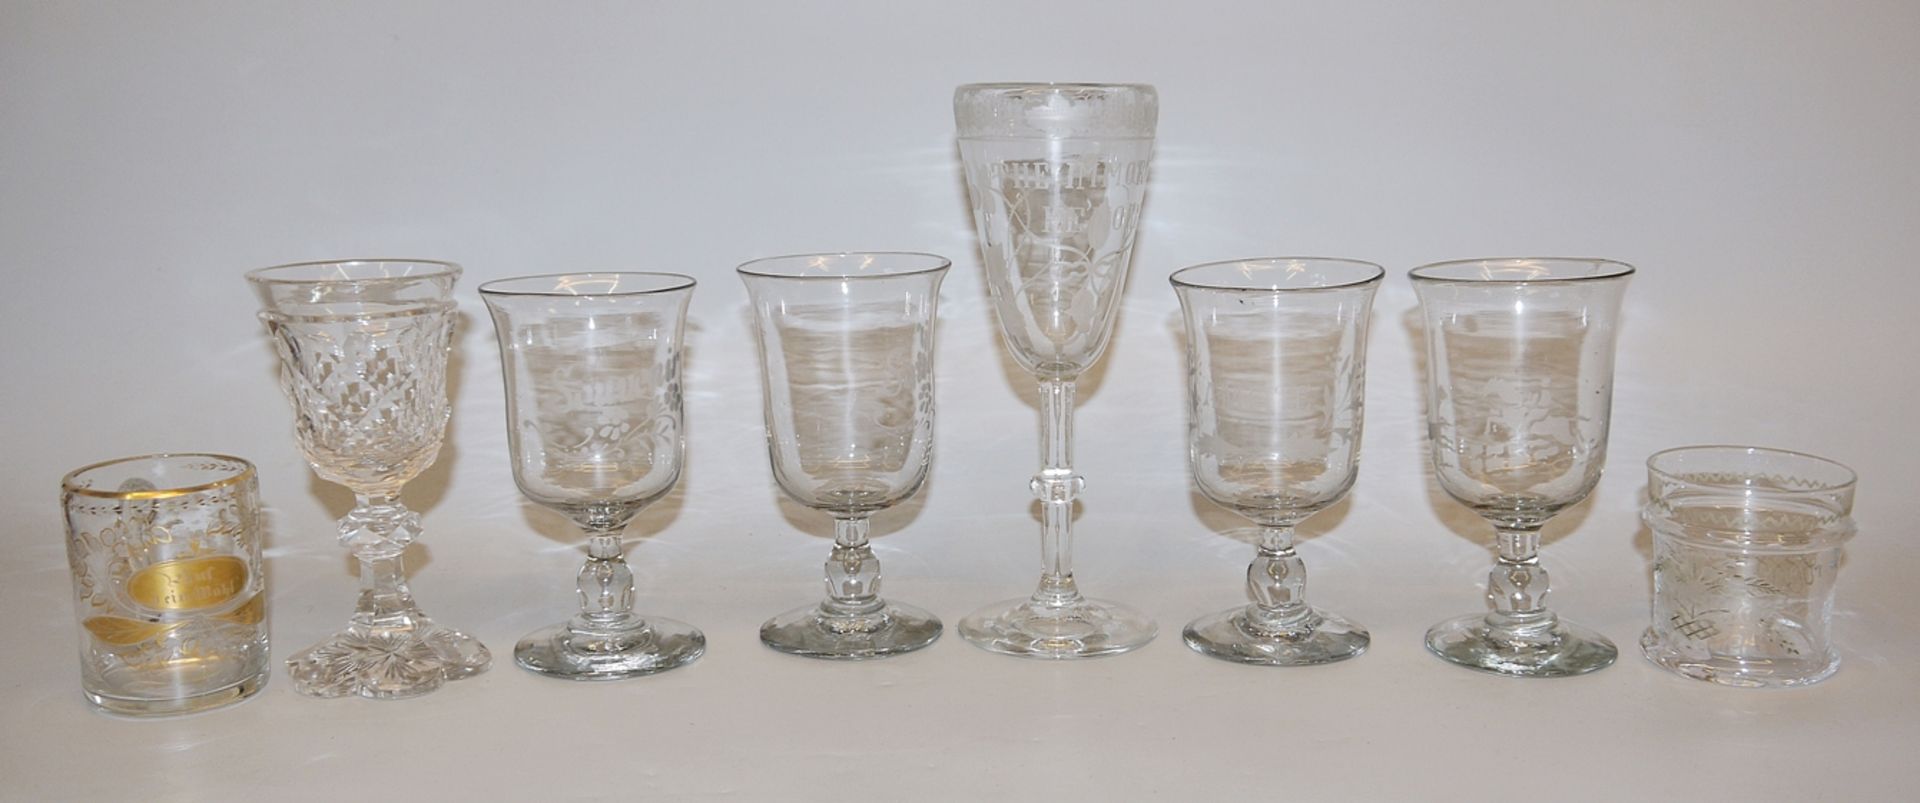 Eight 19th century drinking glasses of colourless glass